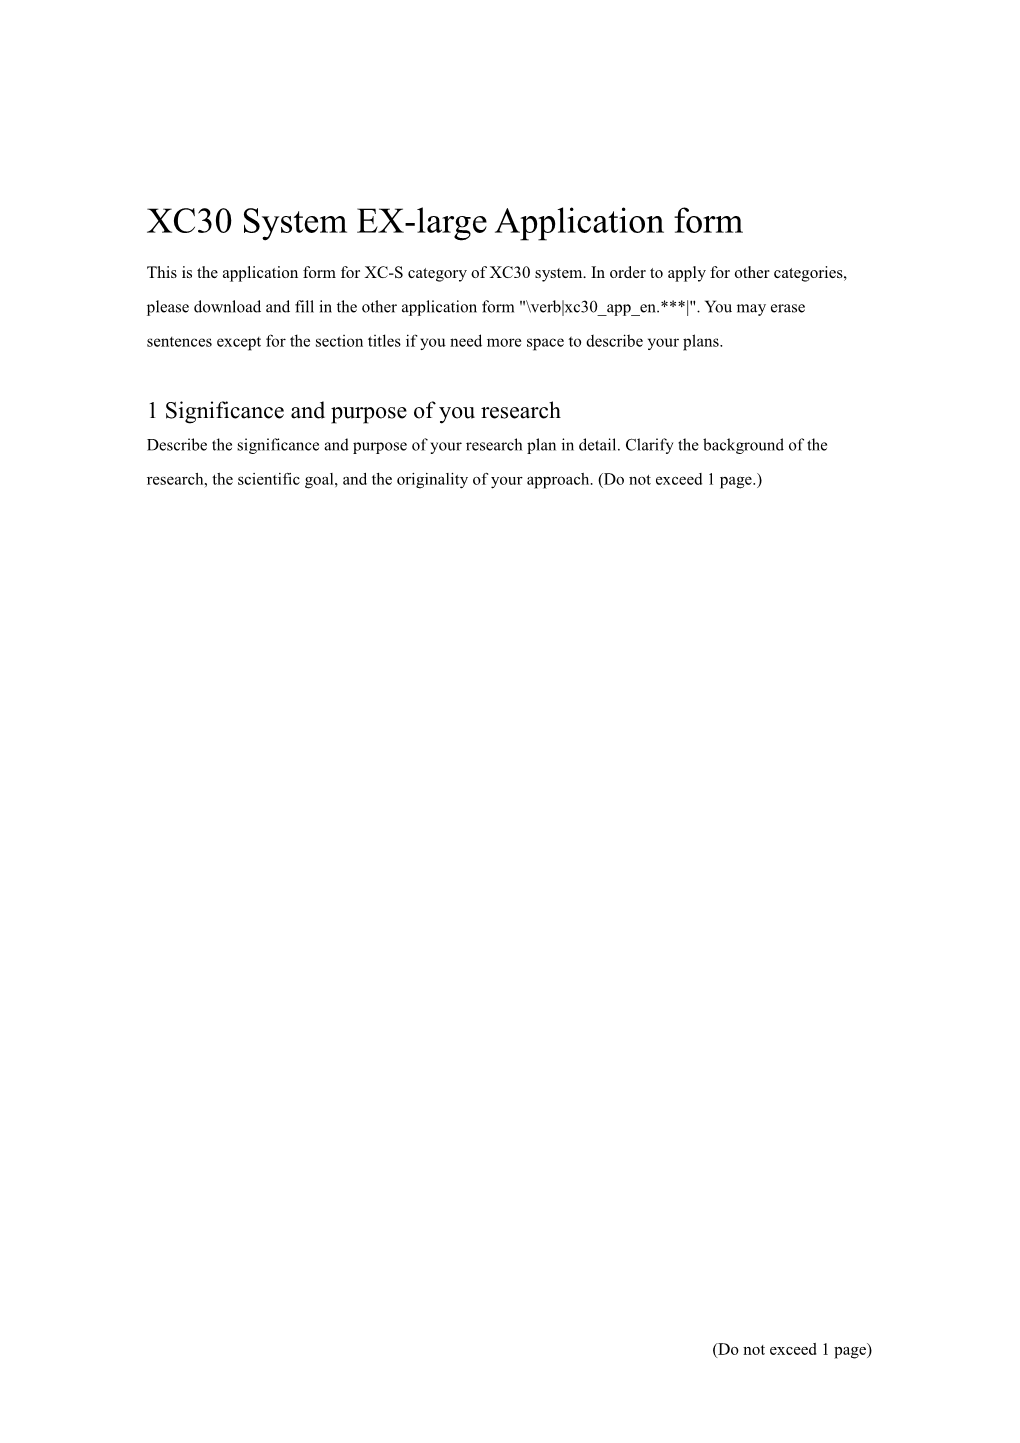 XC30 System EX-Large Application Form